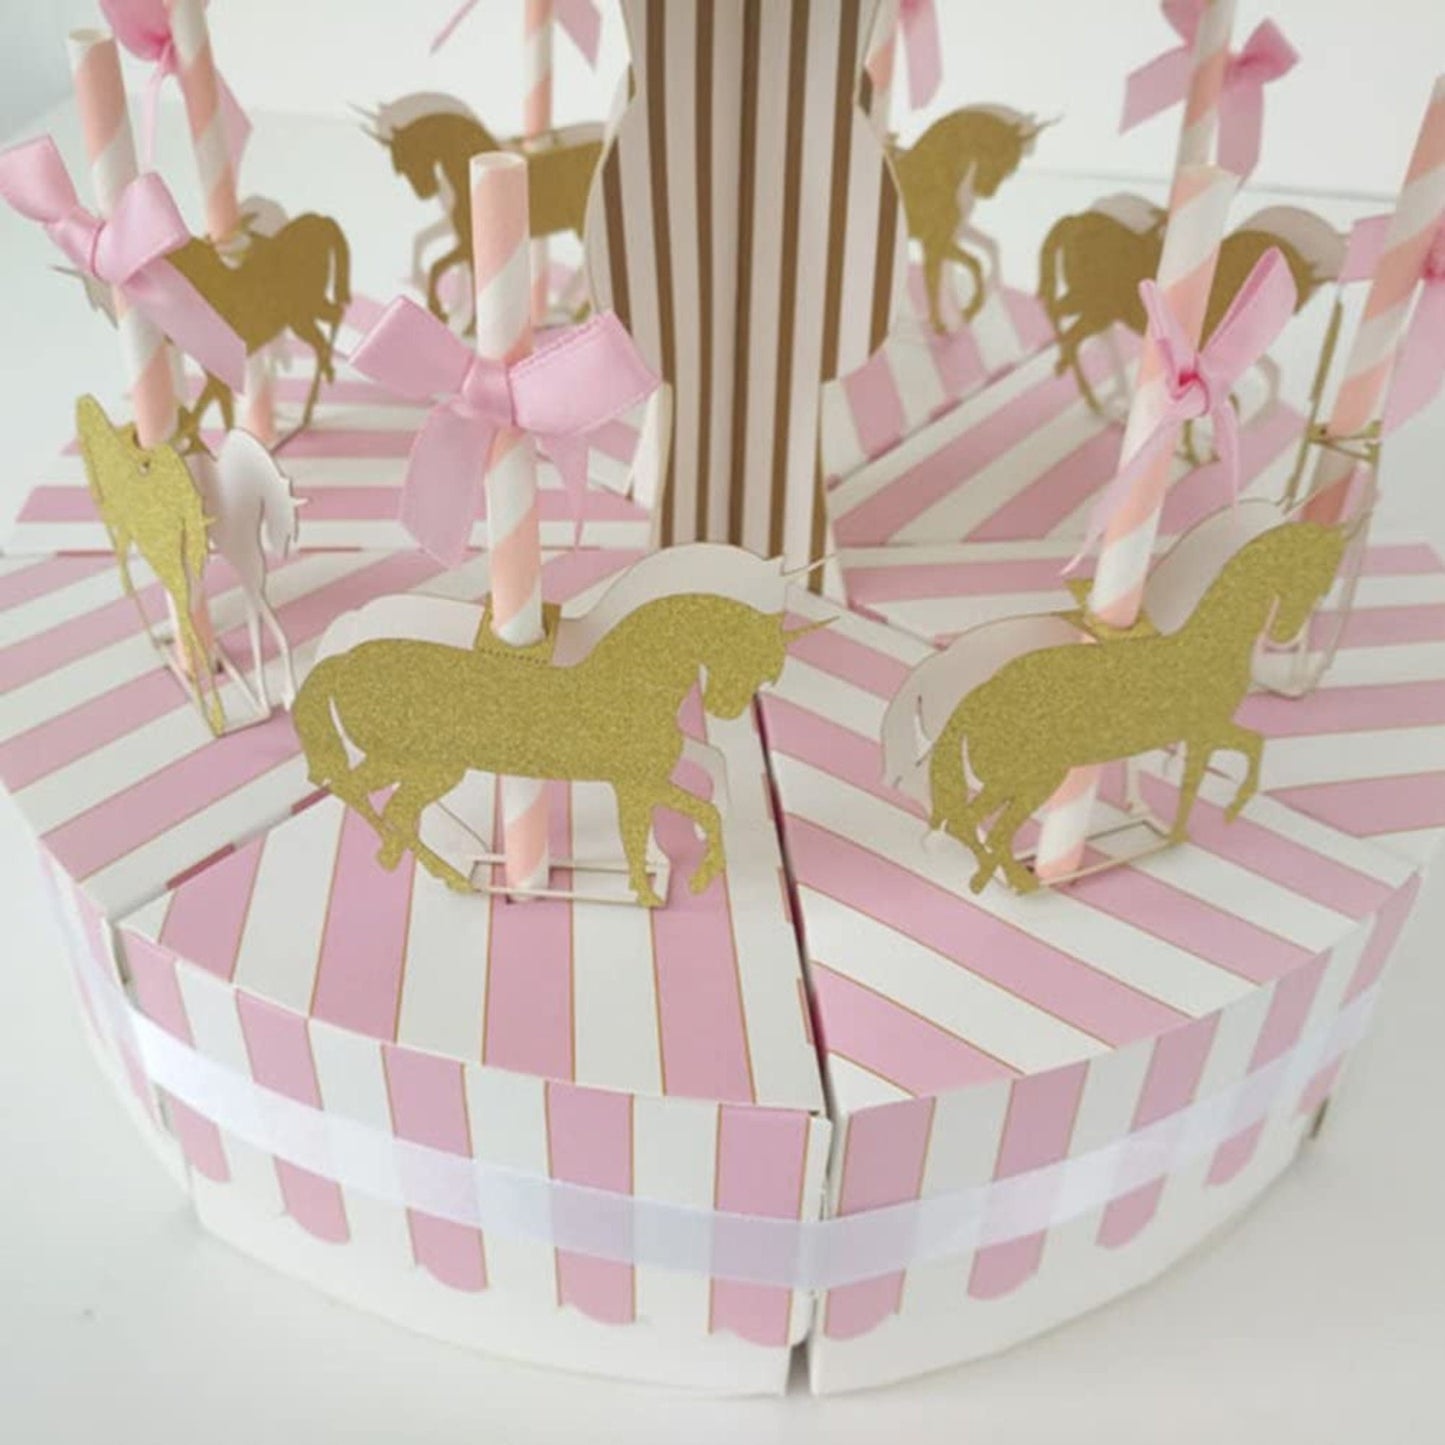 Paper Carousel Horse Carnival Theme Gift Boxes